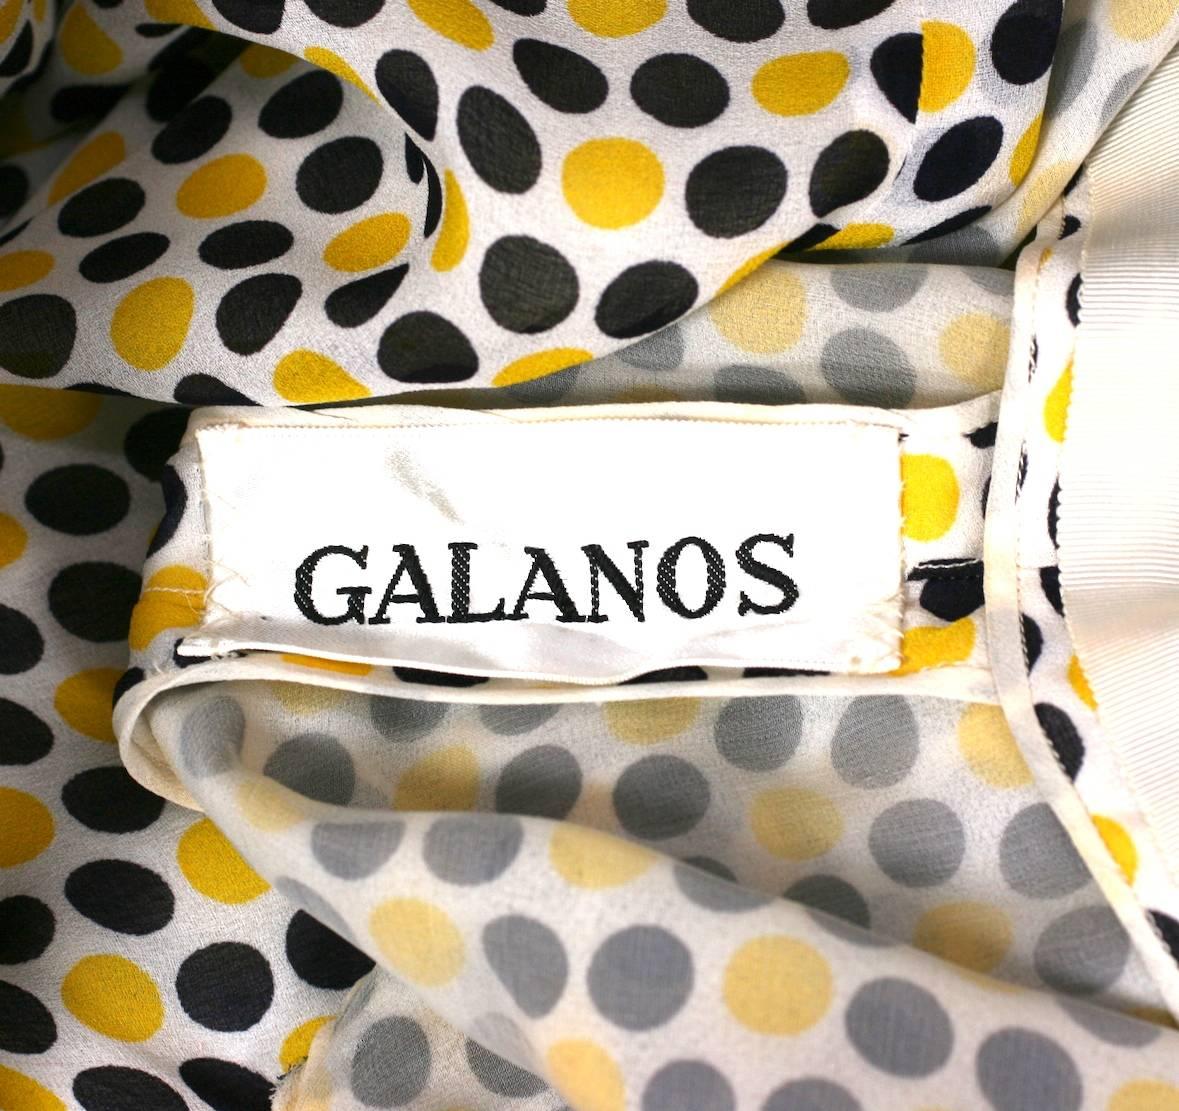 Galanos Yellow and Black Polka Dot Crepe Gown For Sale 2